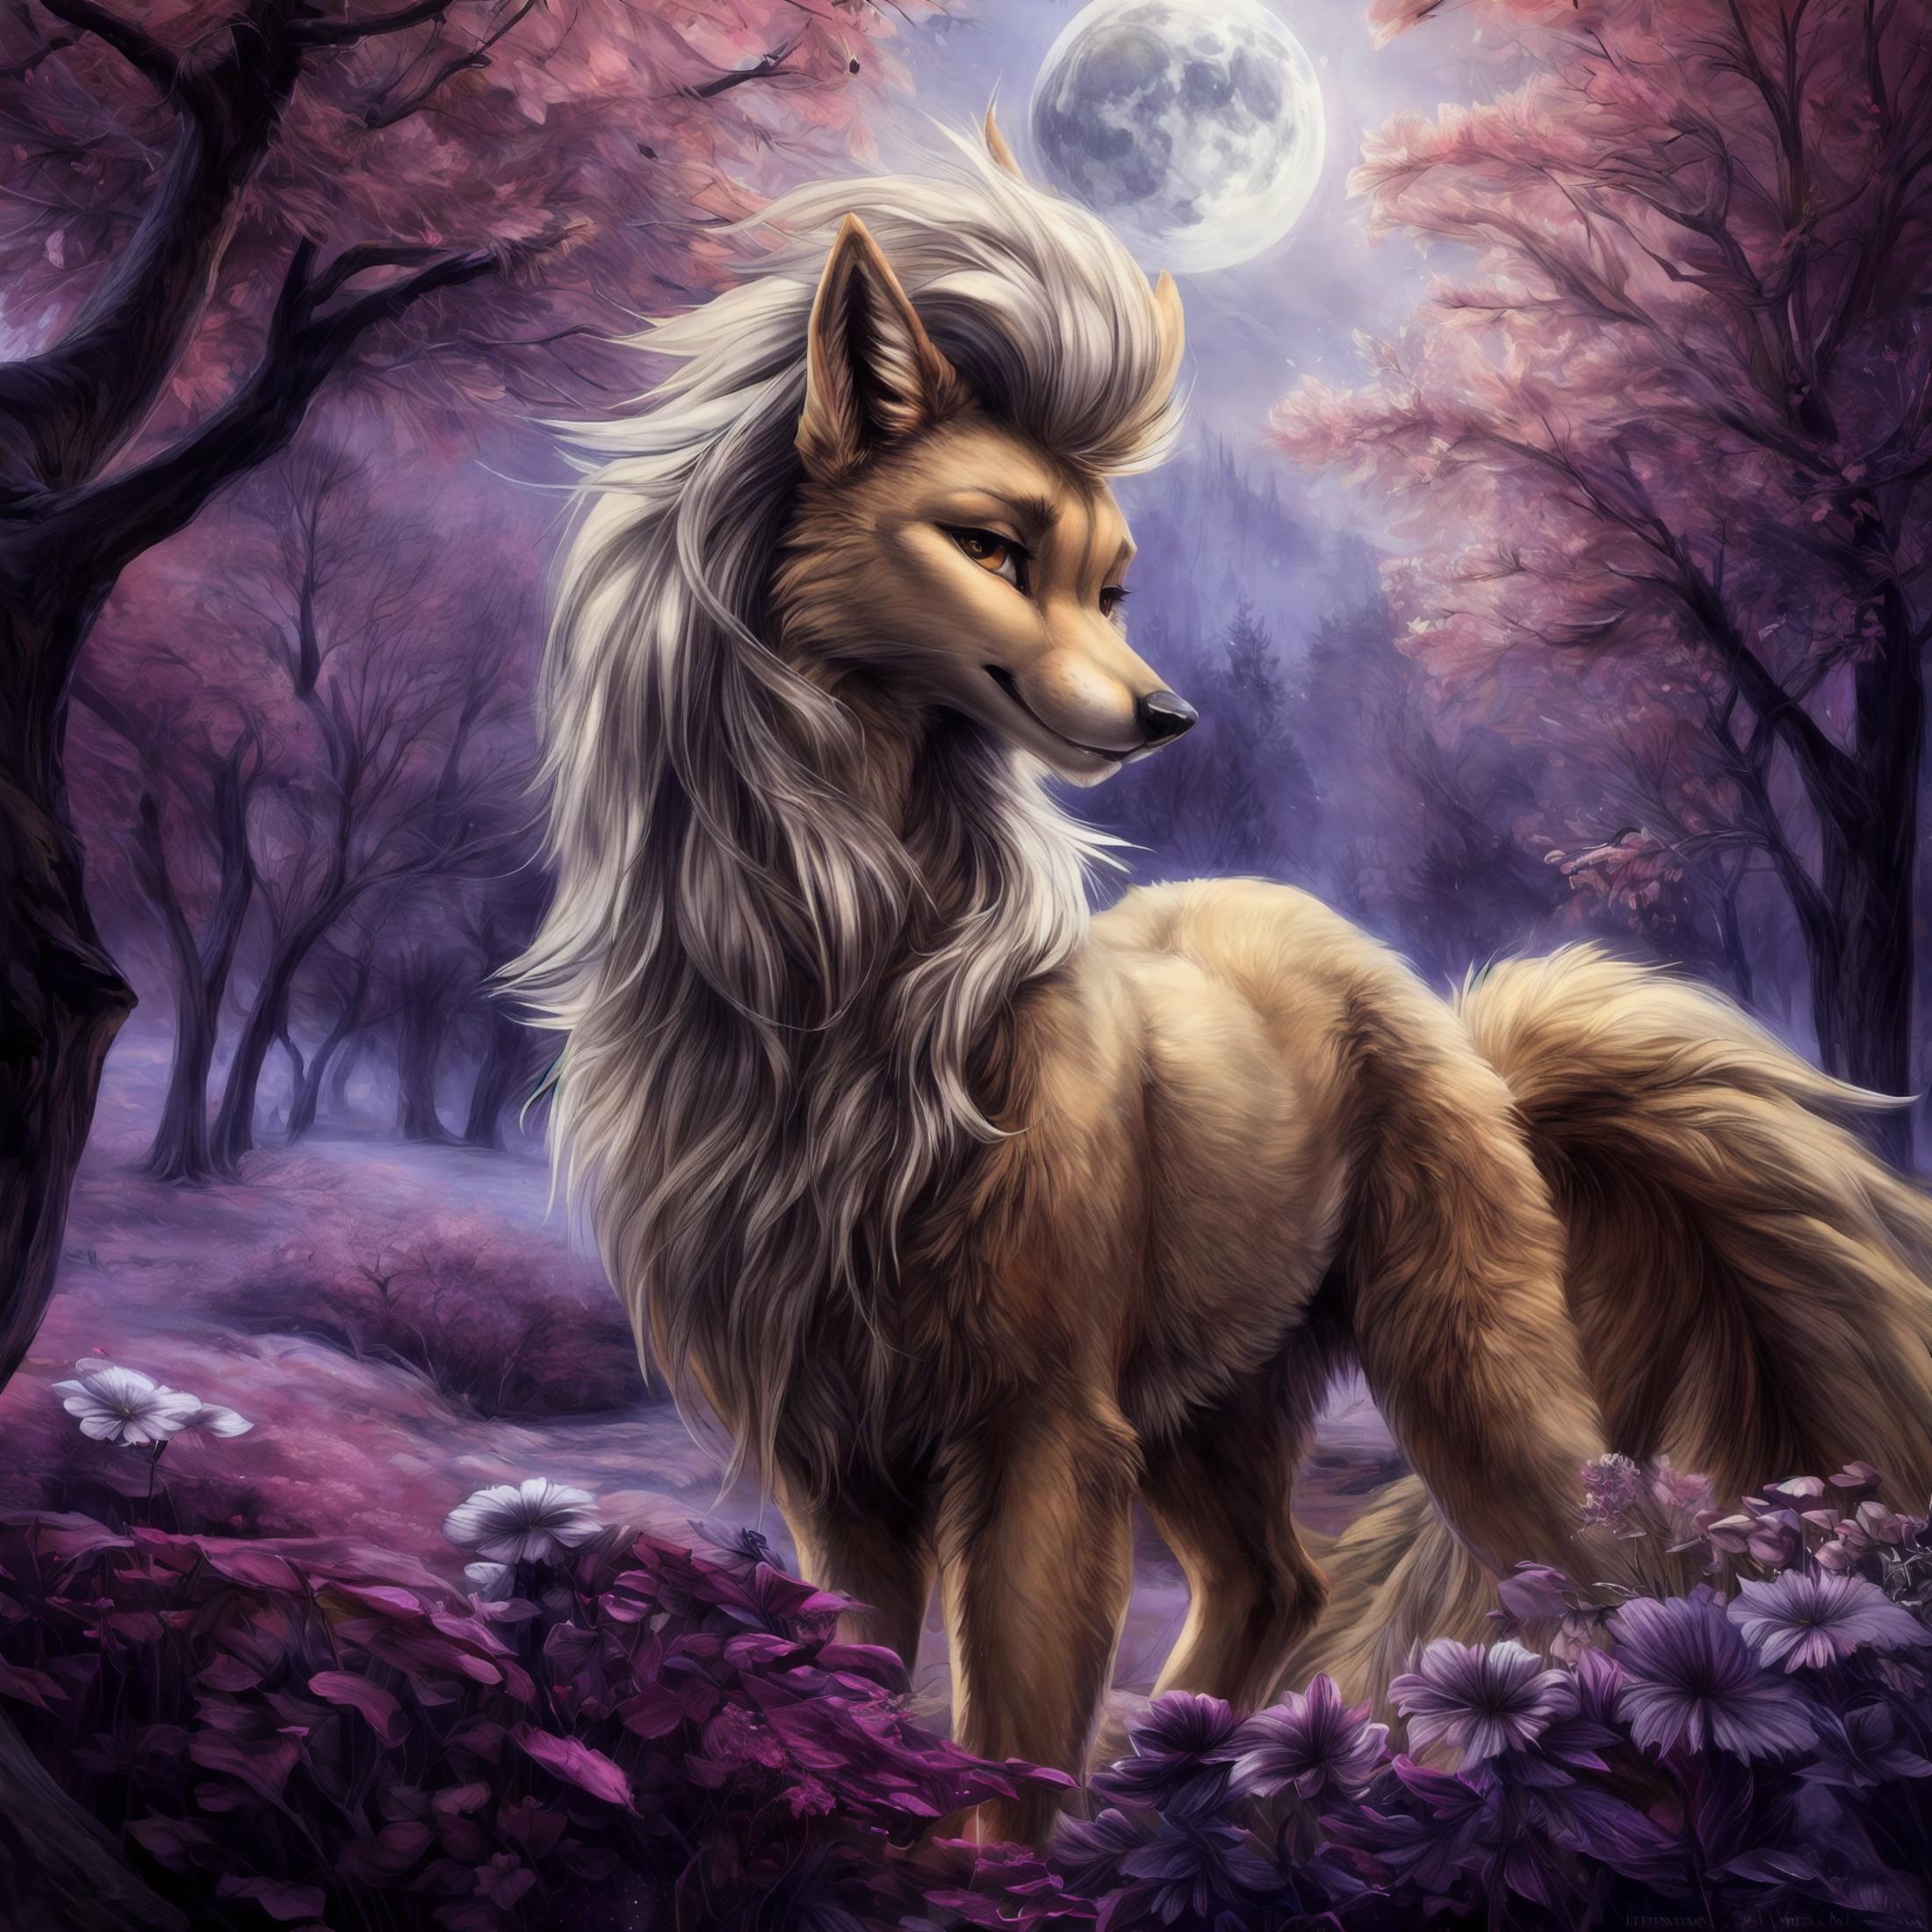 A majestic wolf-like creature stands in a field under a full moon.